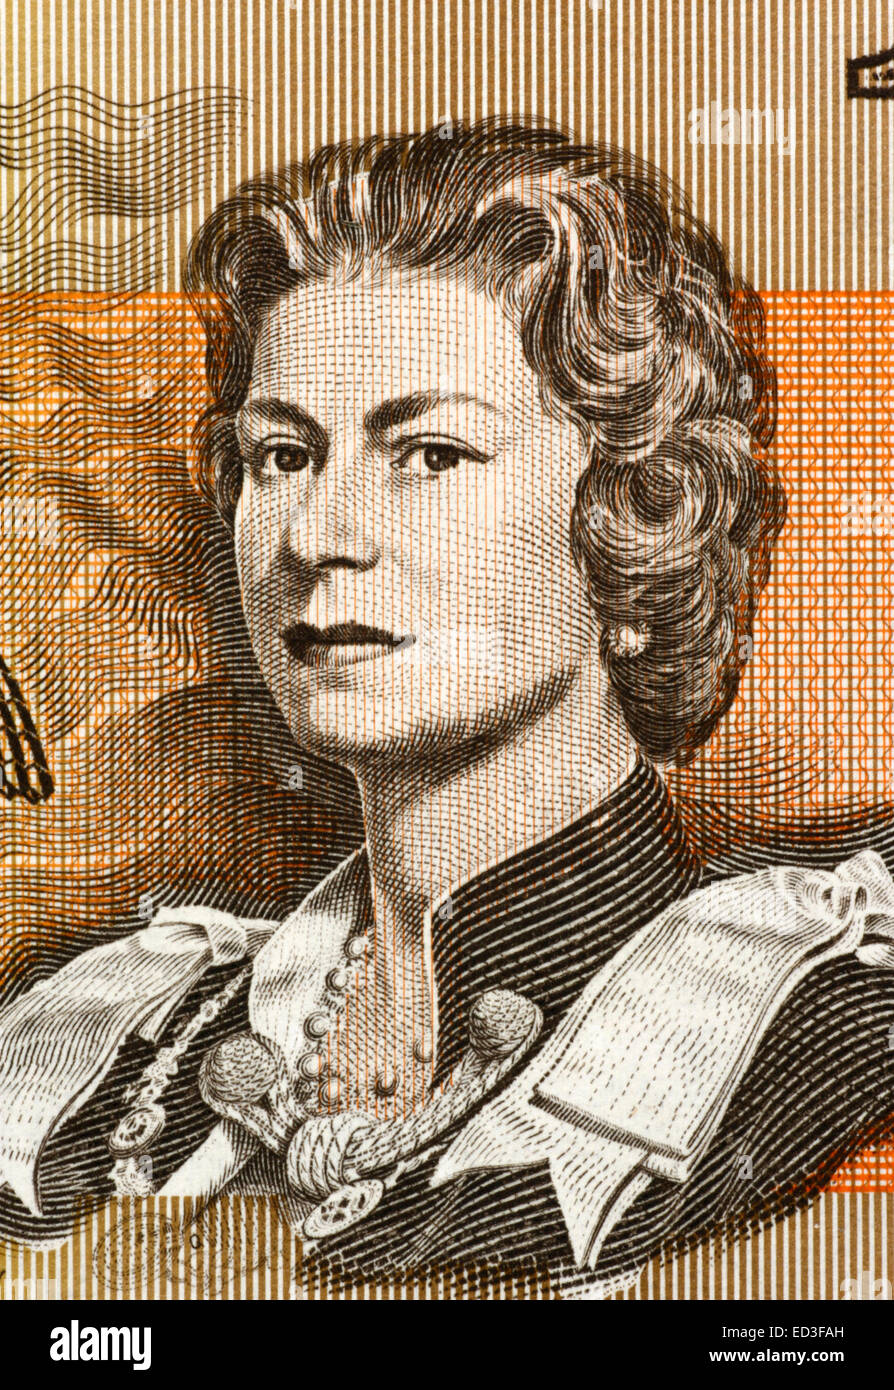 Queen Elizabeth II  (born 1926) on 1 Dollar 1966 banknote from Australia. Queen of the United Kingdom. Stock Photo